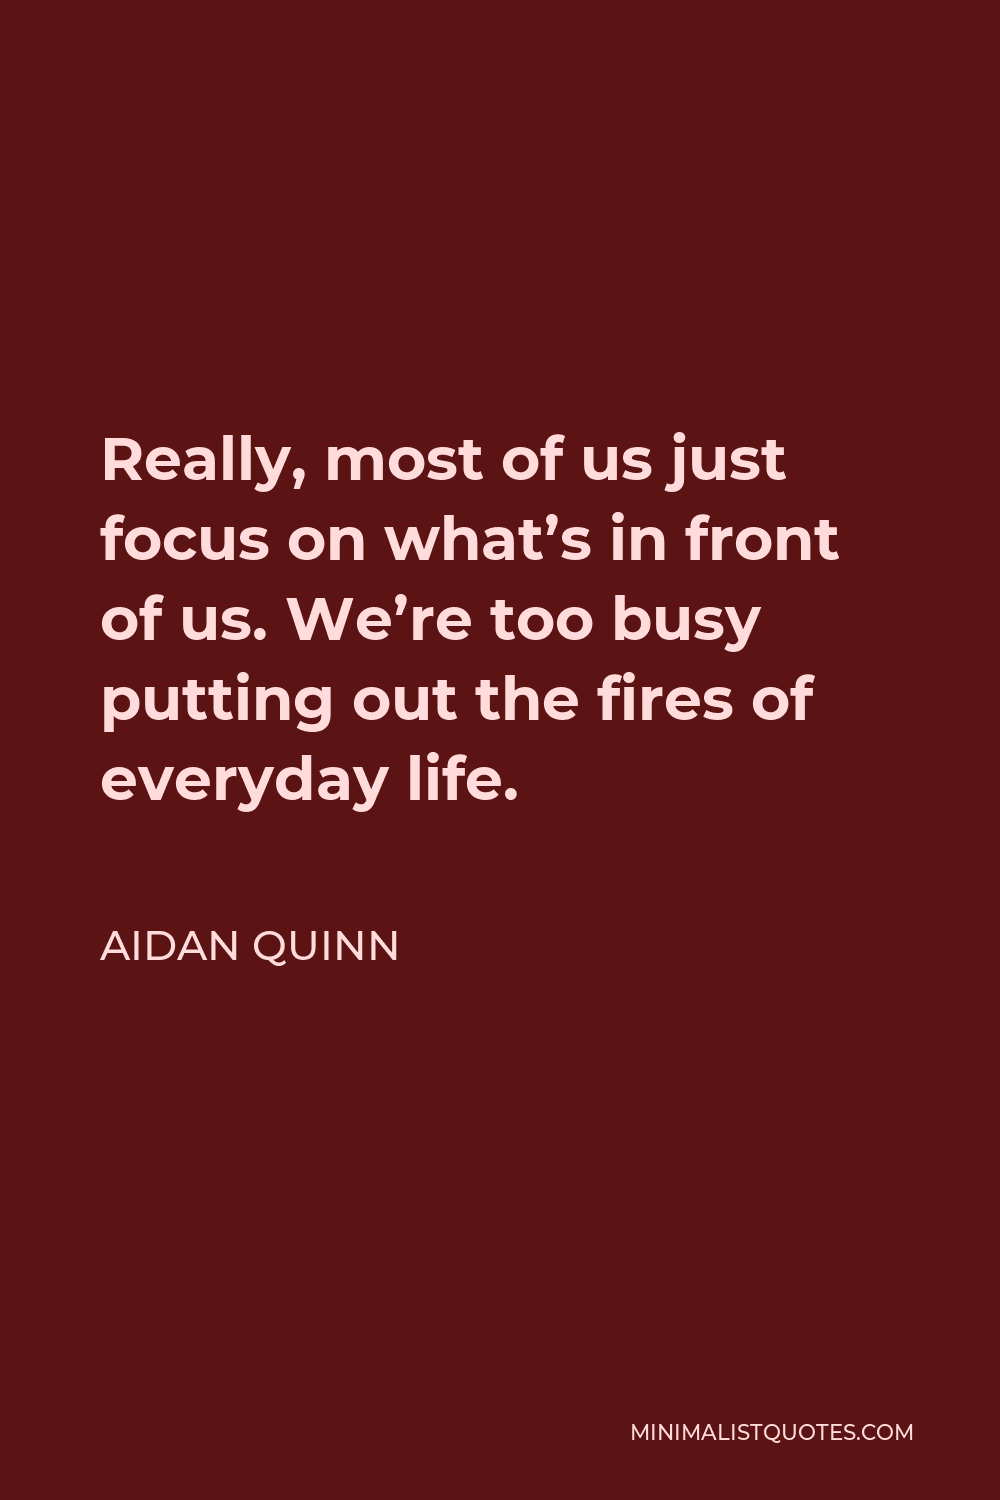 Aidan Quinn Quote - Really, most of us just focus on what’s in front of us. We’re too busy putting out the fires of everyday life.